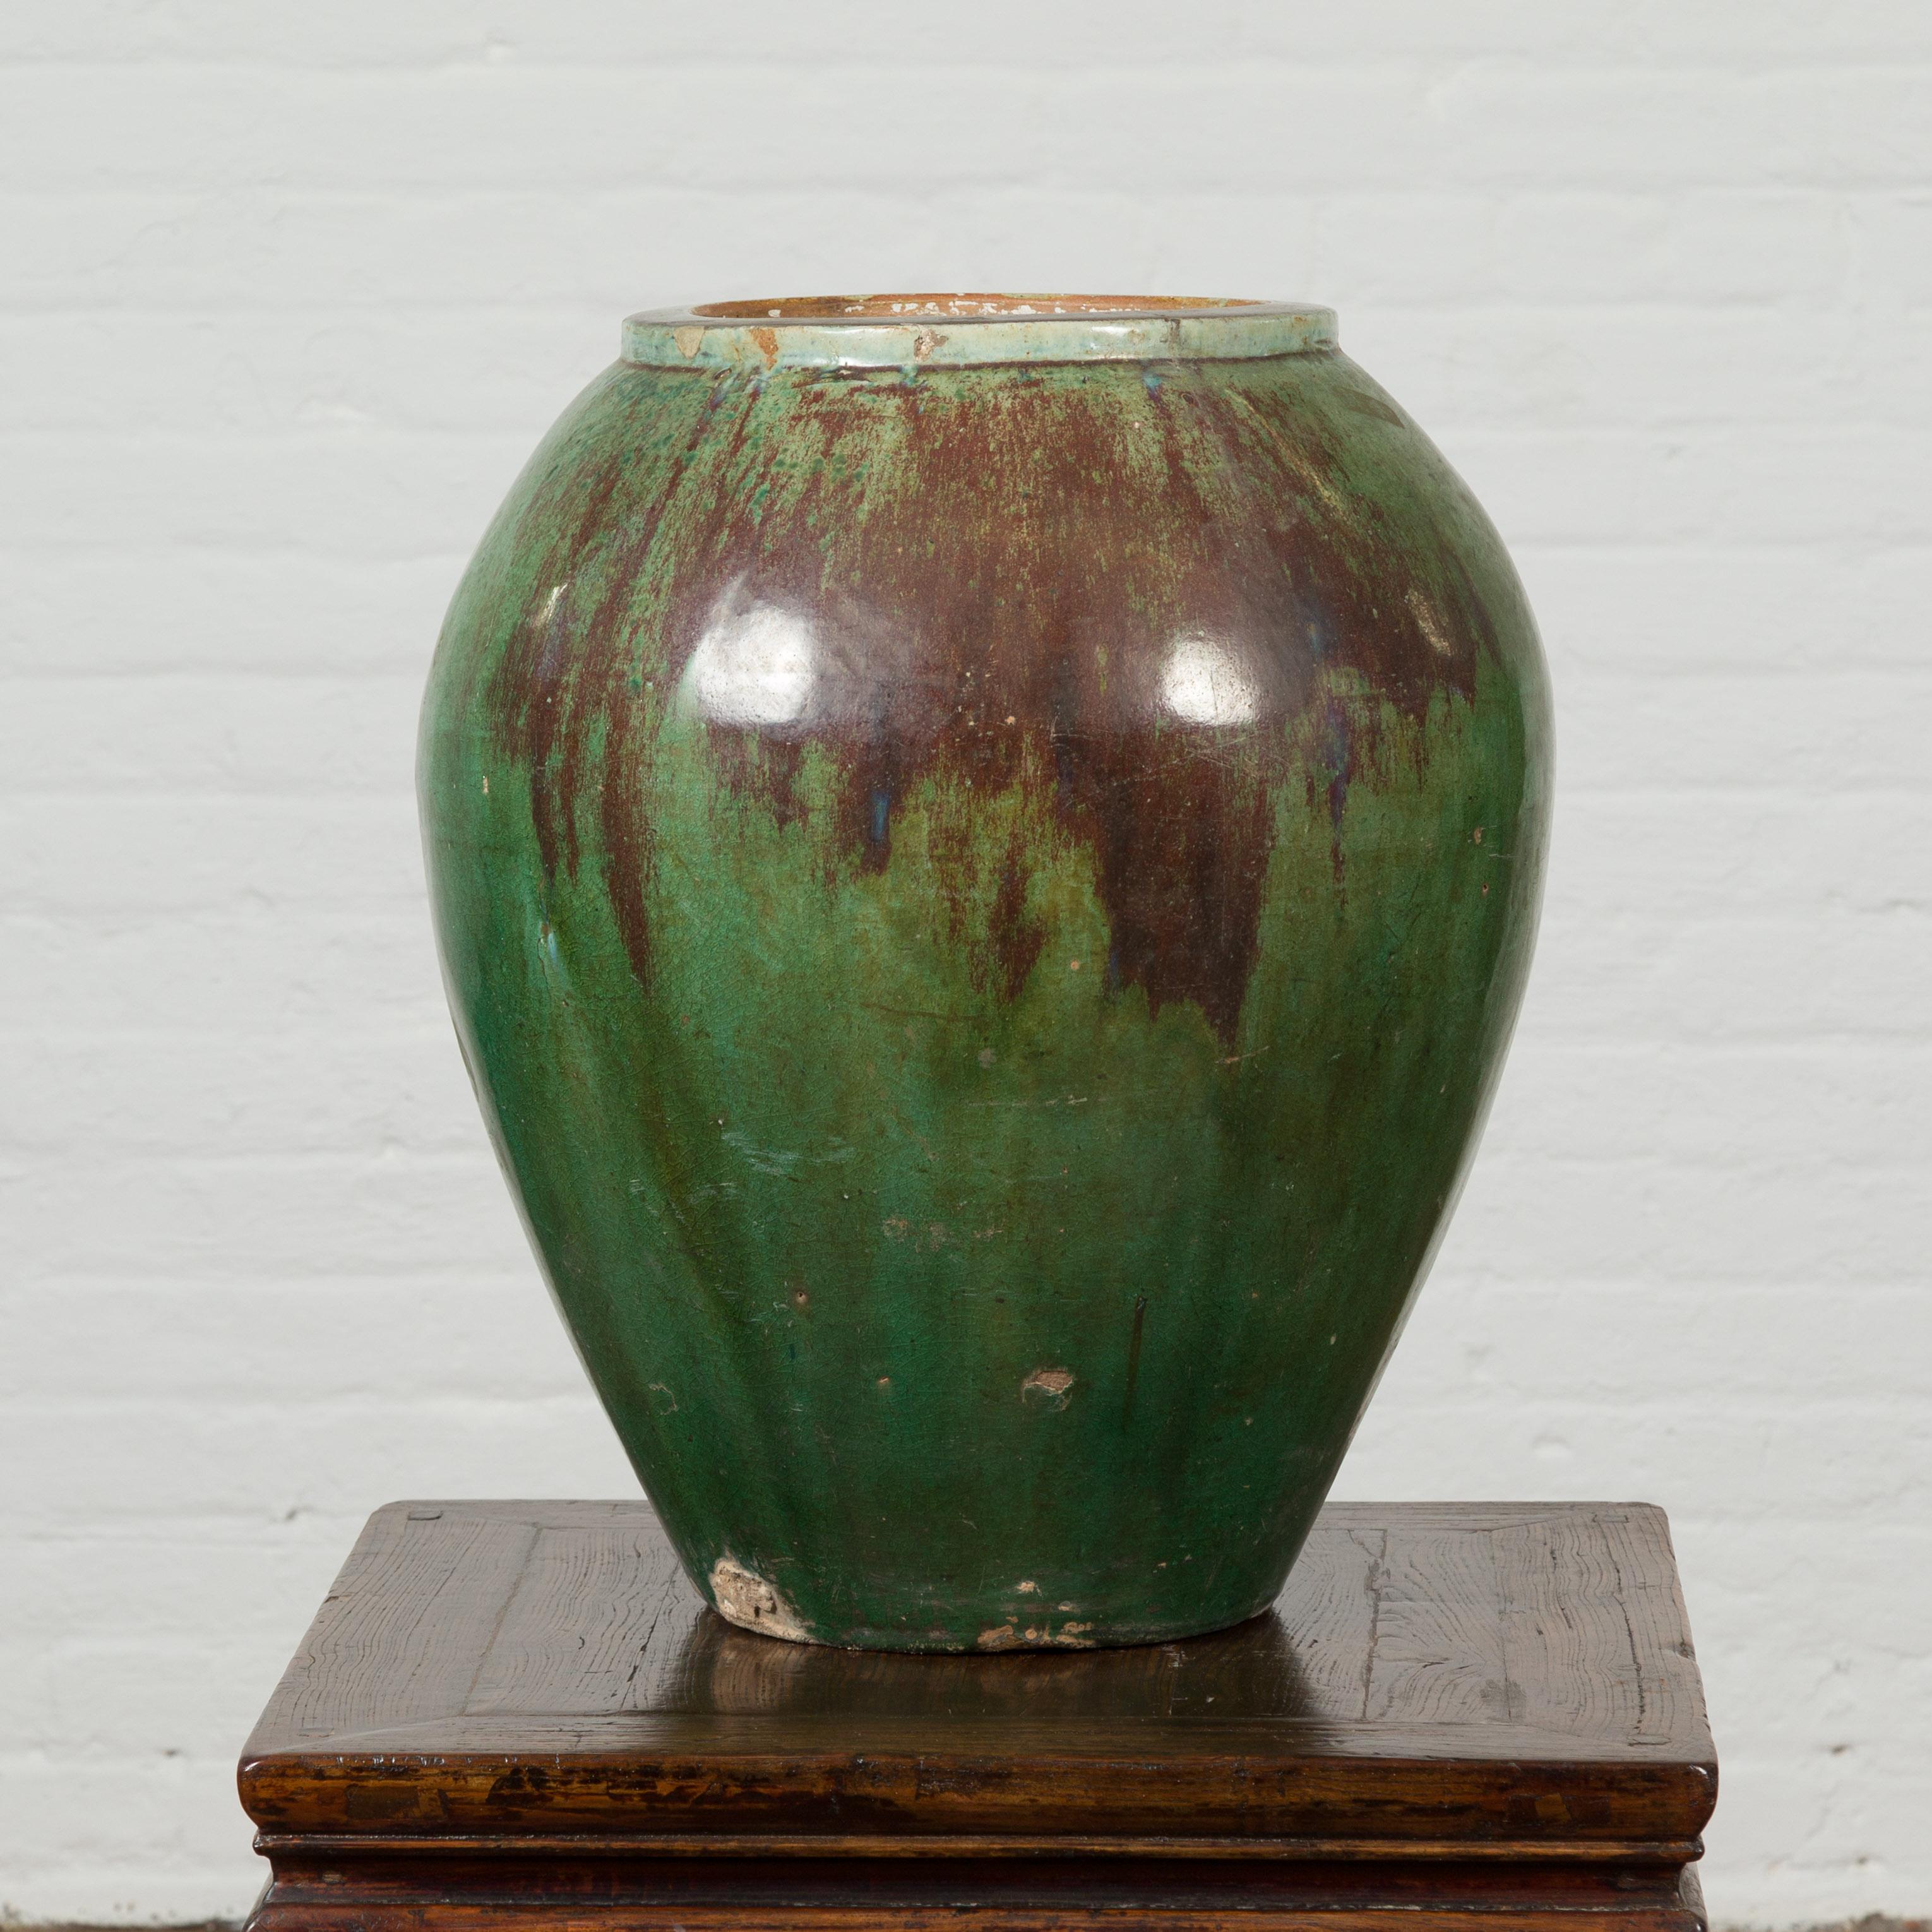 An antique Thai garden vase from the 19th century, with distressed verde patina and drip glaze. Created in Thailand during the 19th century, this garden vase features a distressed verde ground accented with a brown drip glaze. With an opening of